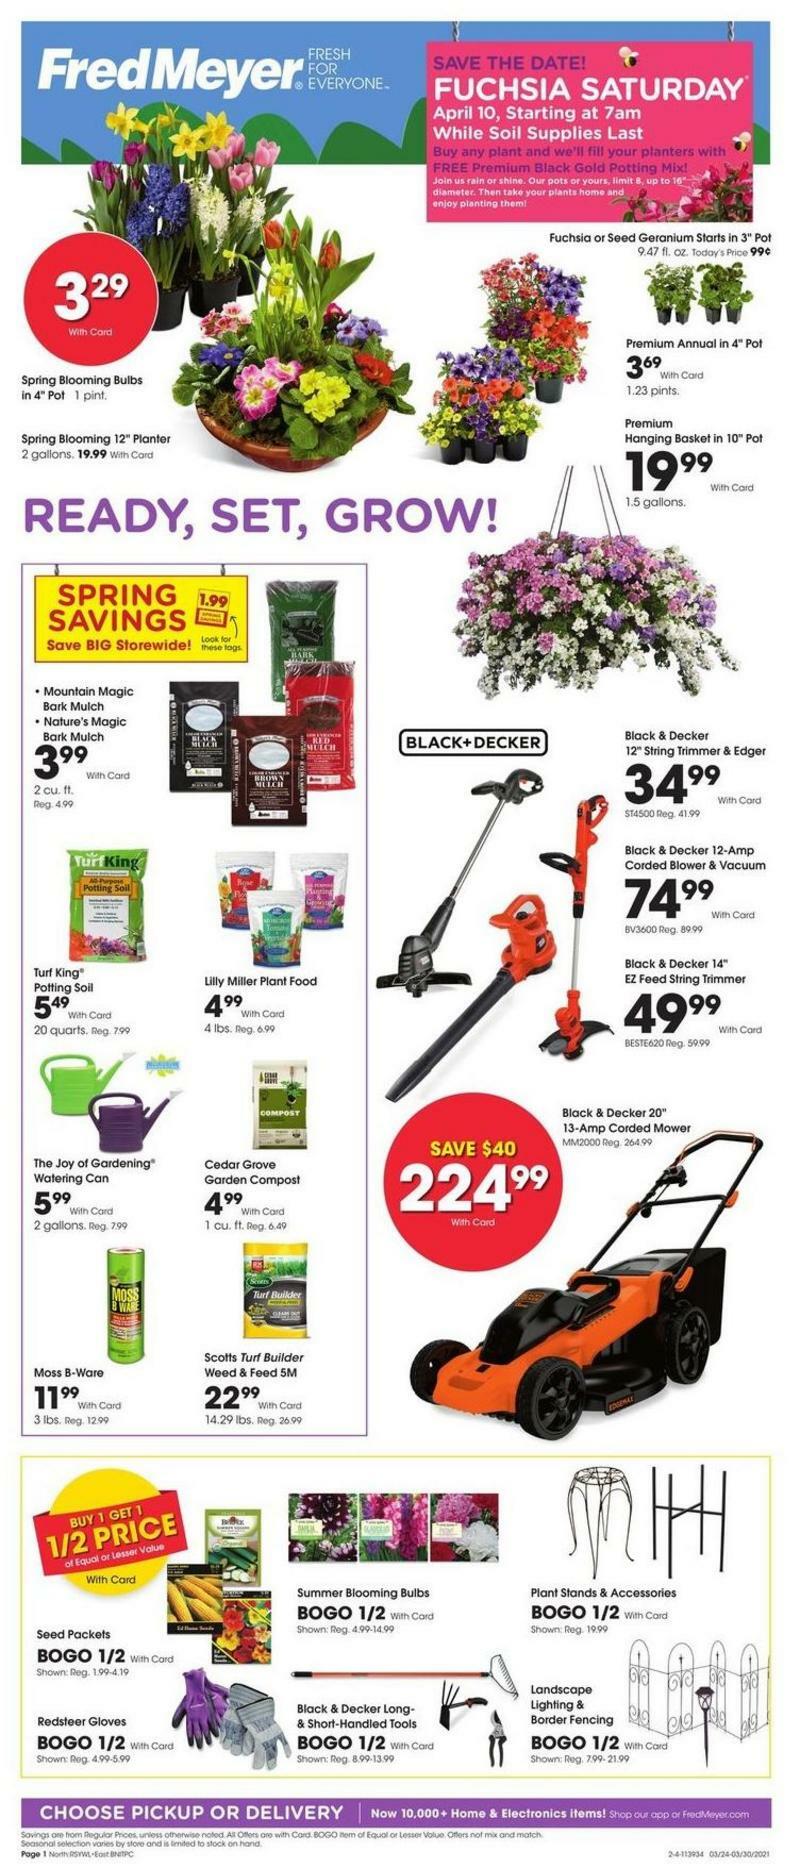 Fred Meyer Garden Weekly Ad & Specials from March 24